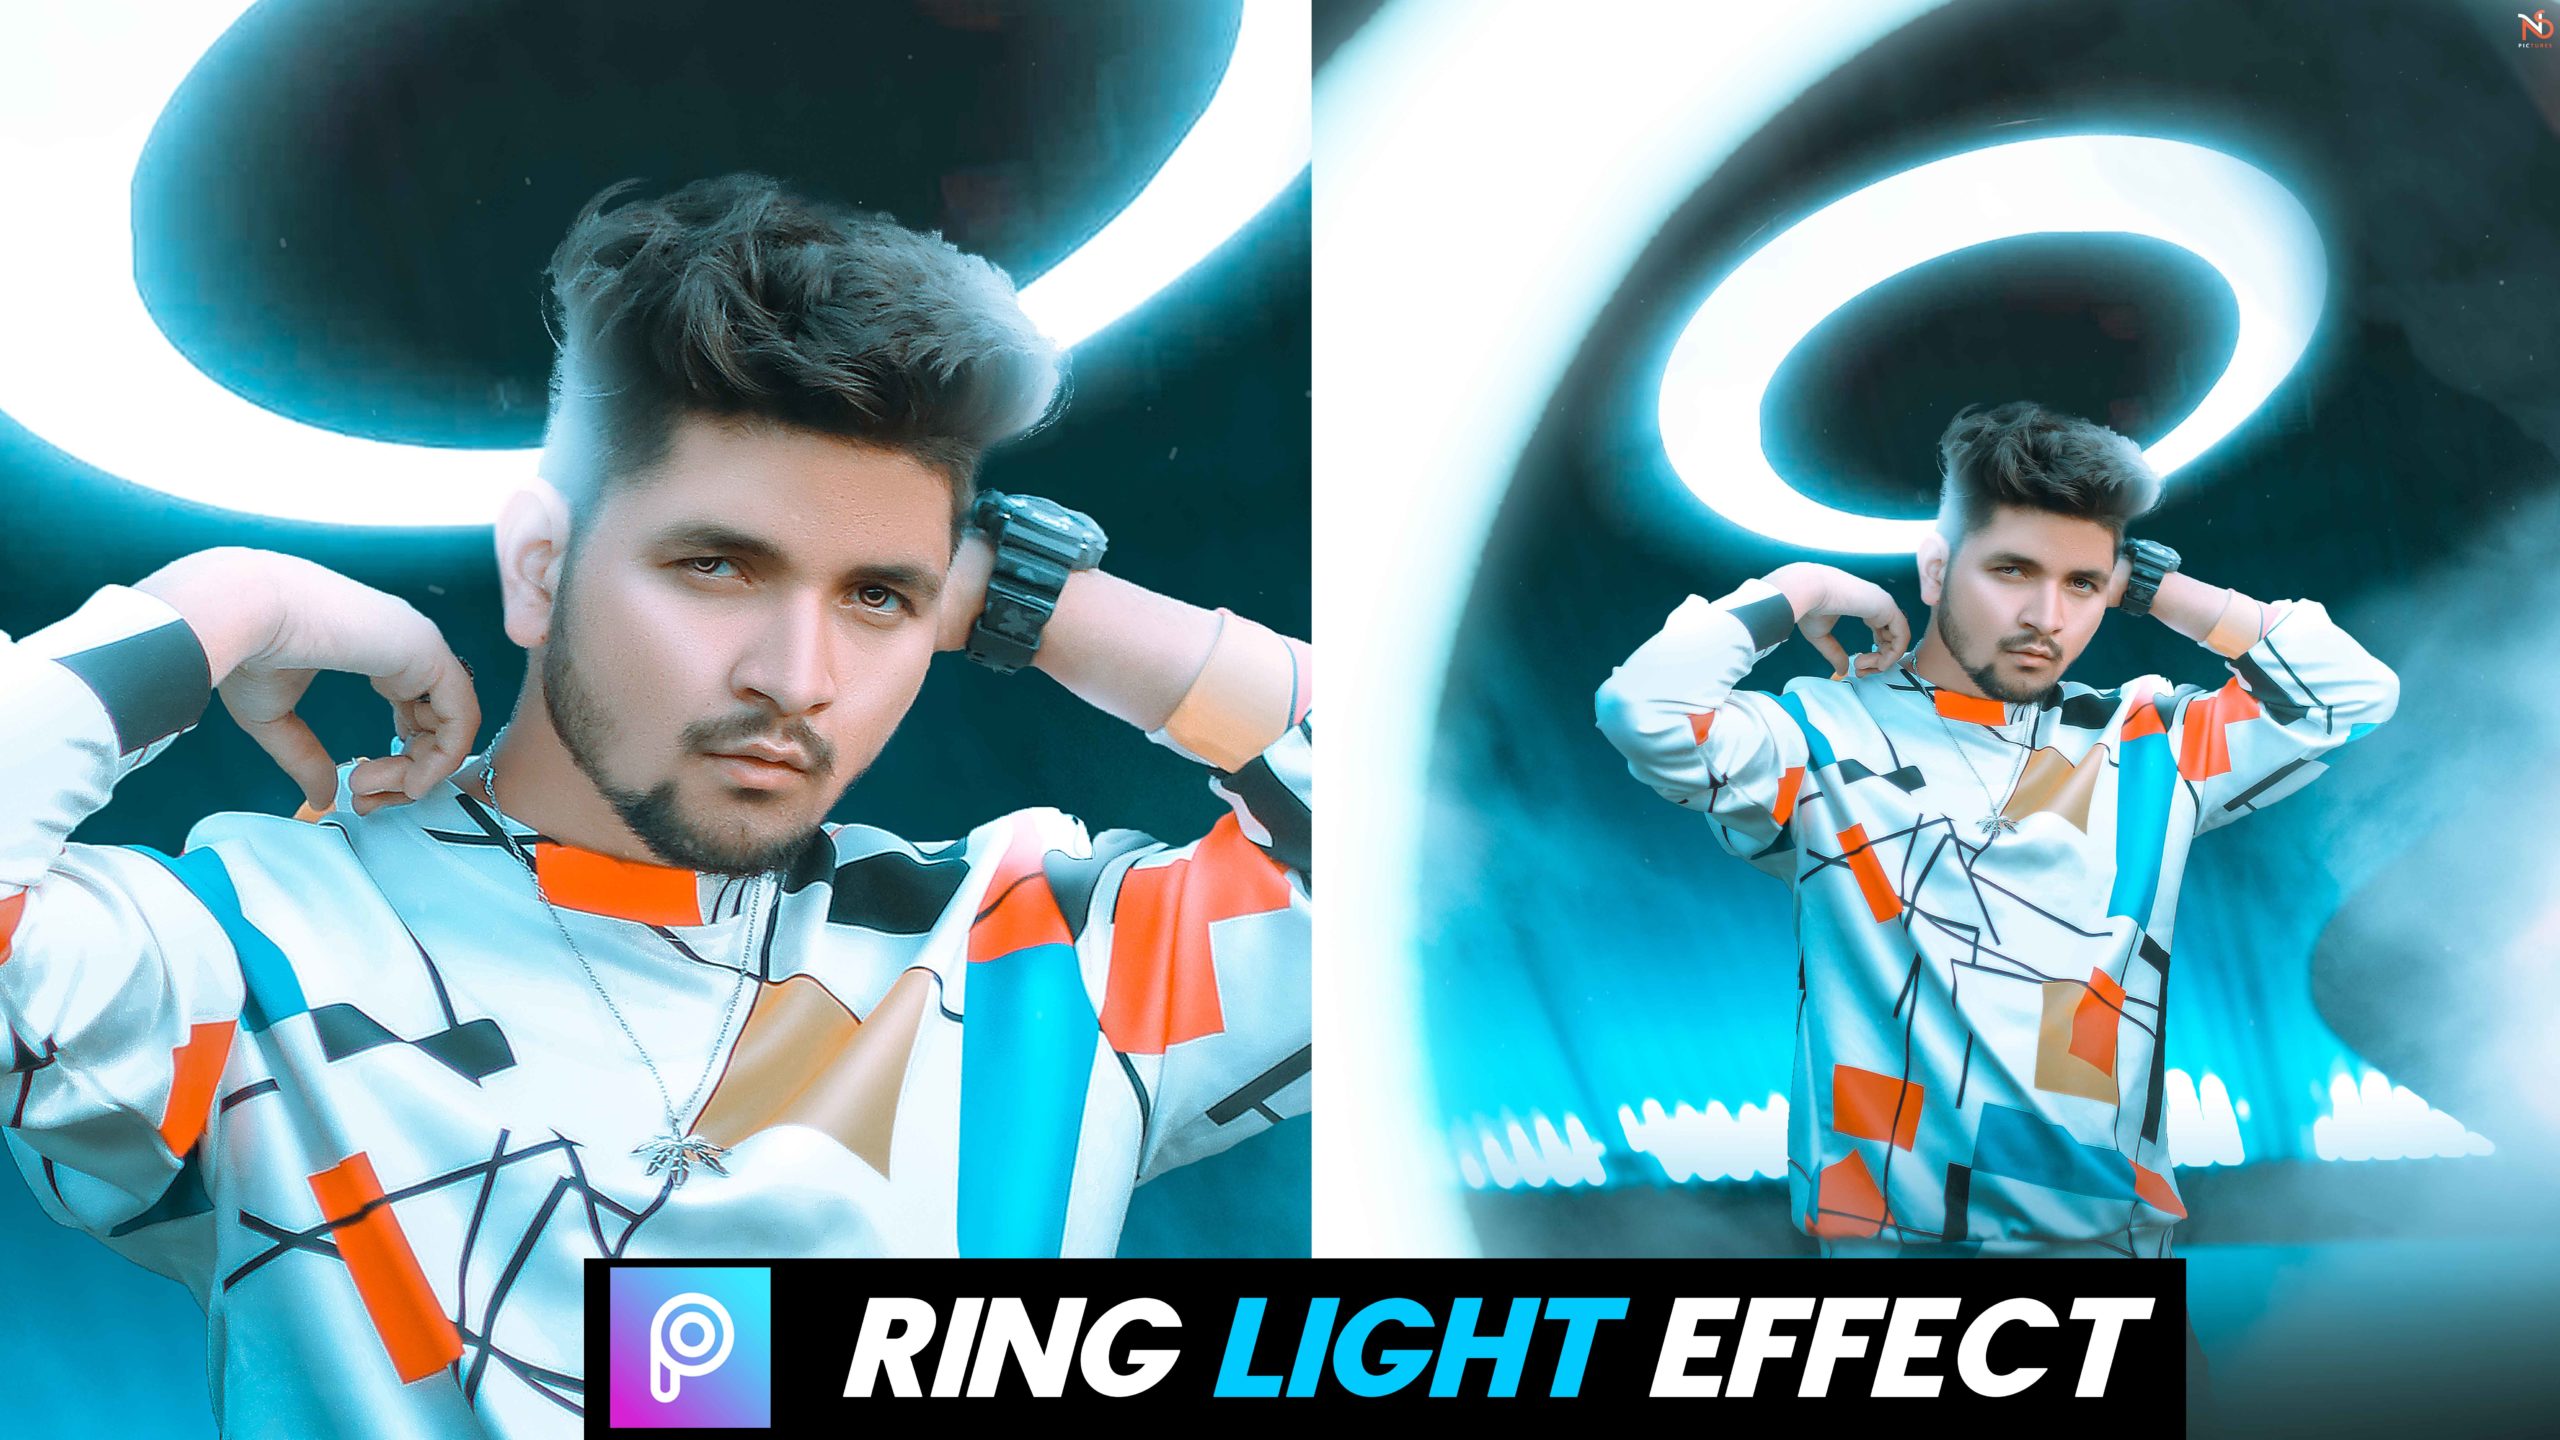 Ring light manipulation background editing download hd